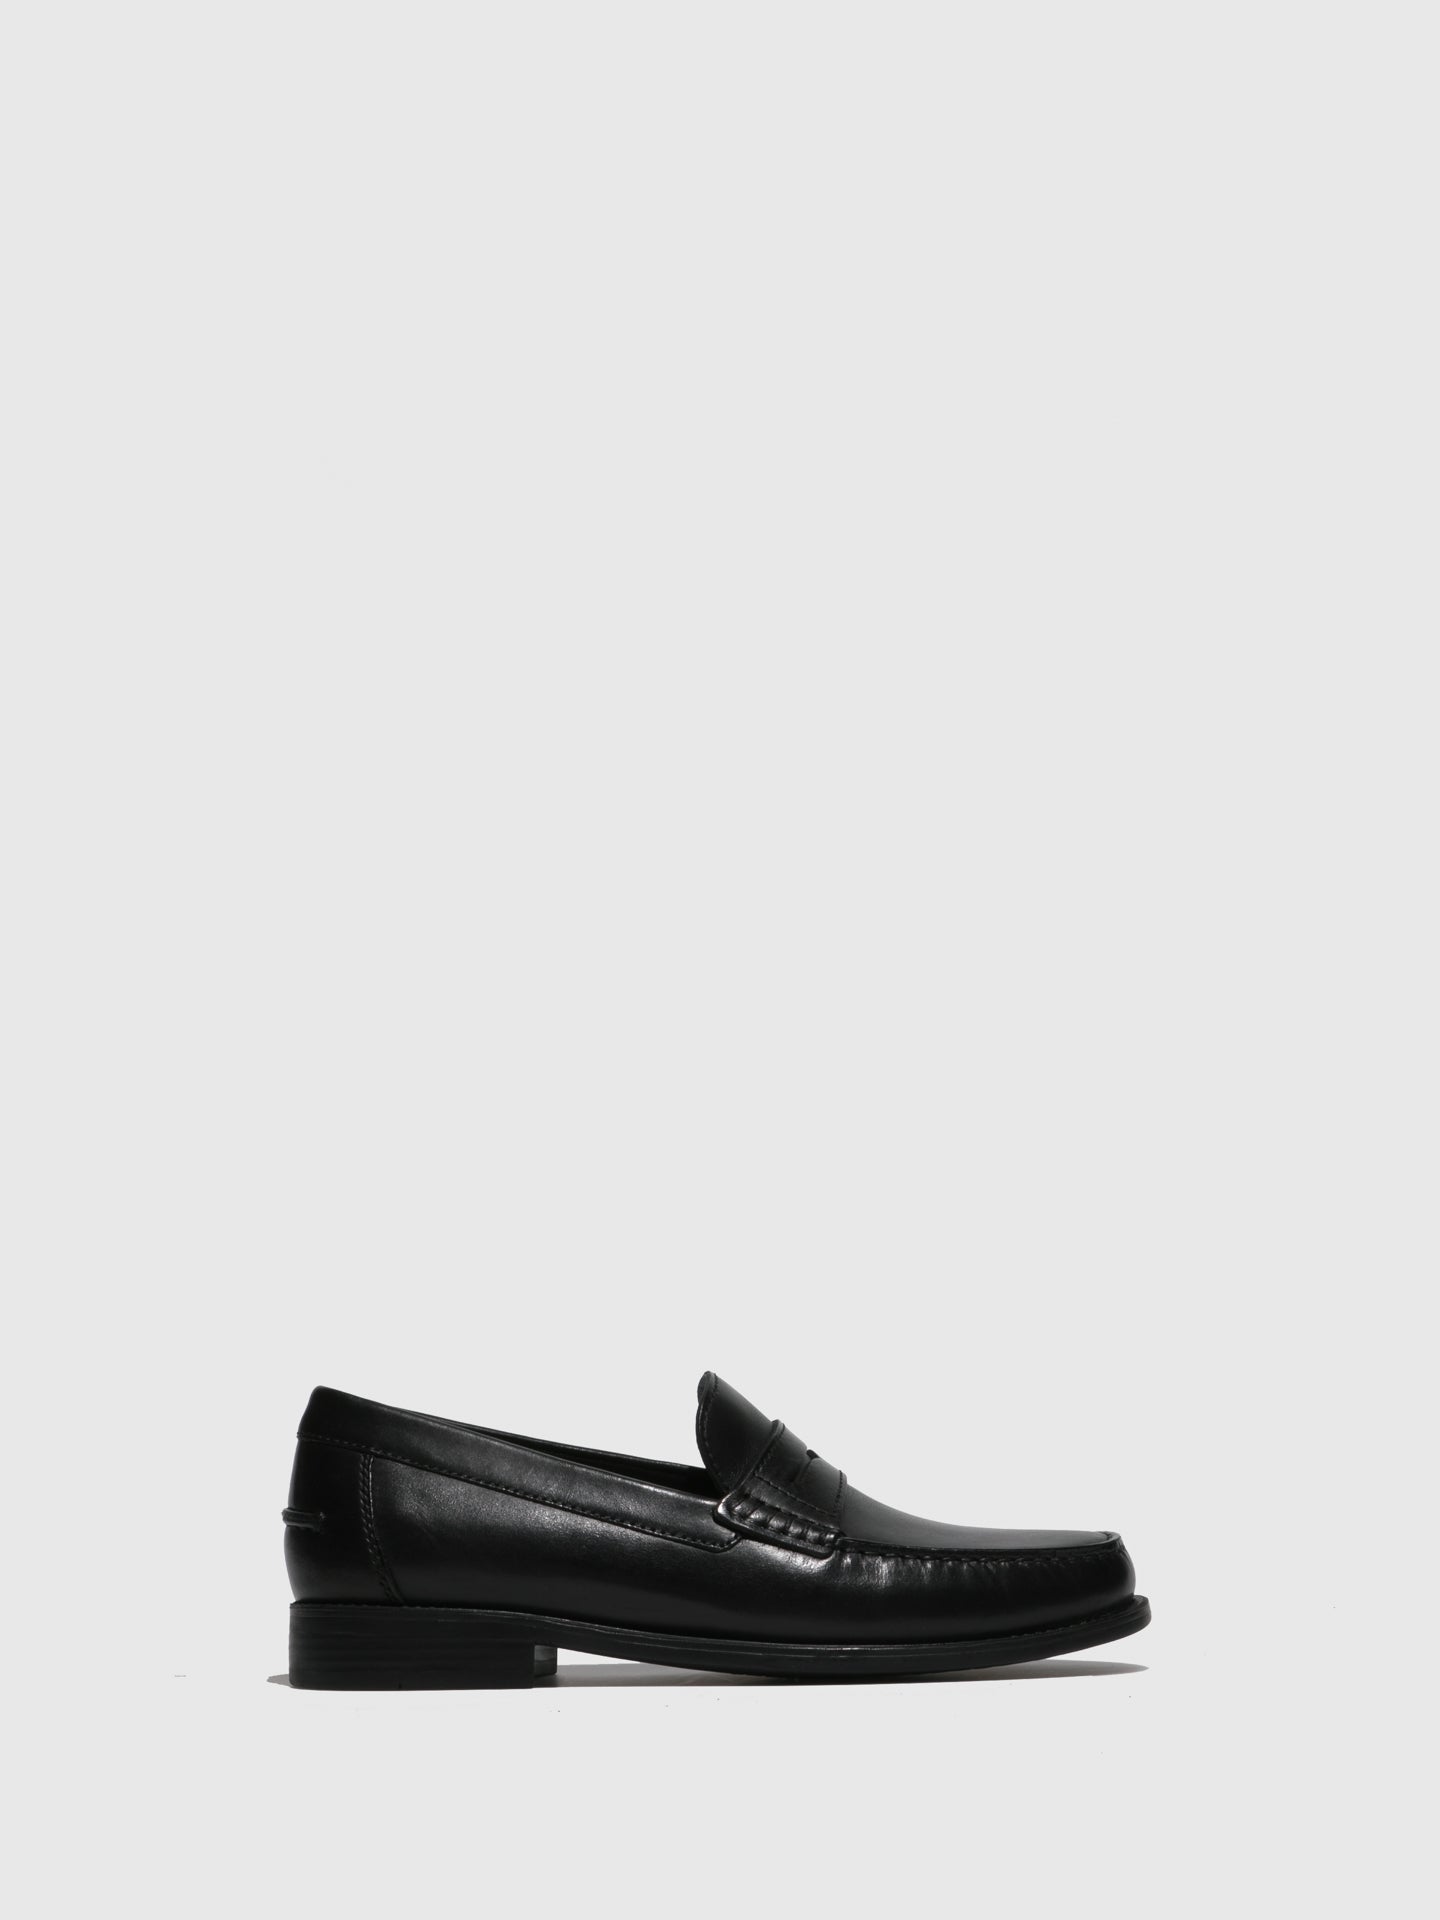 Geox Black Loafers Shoes